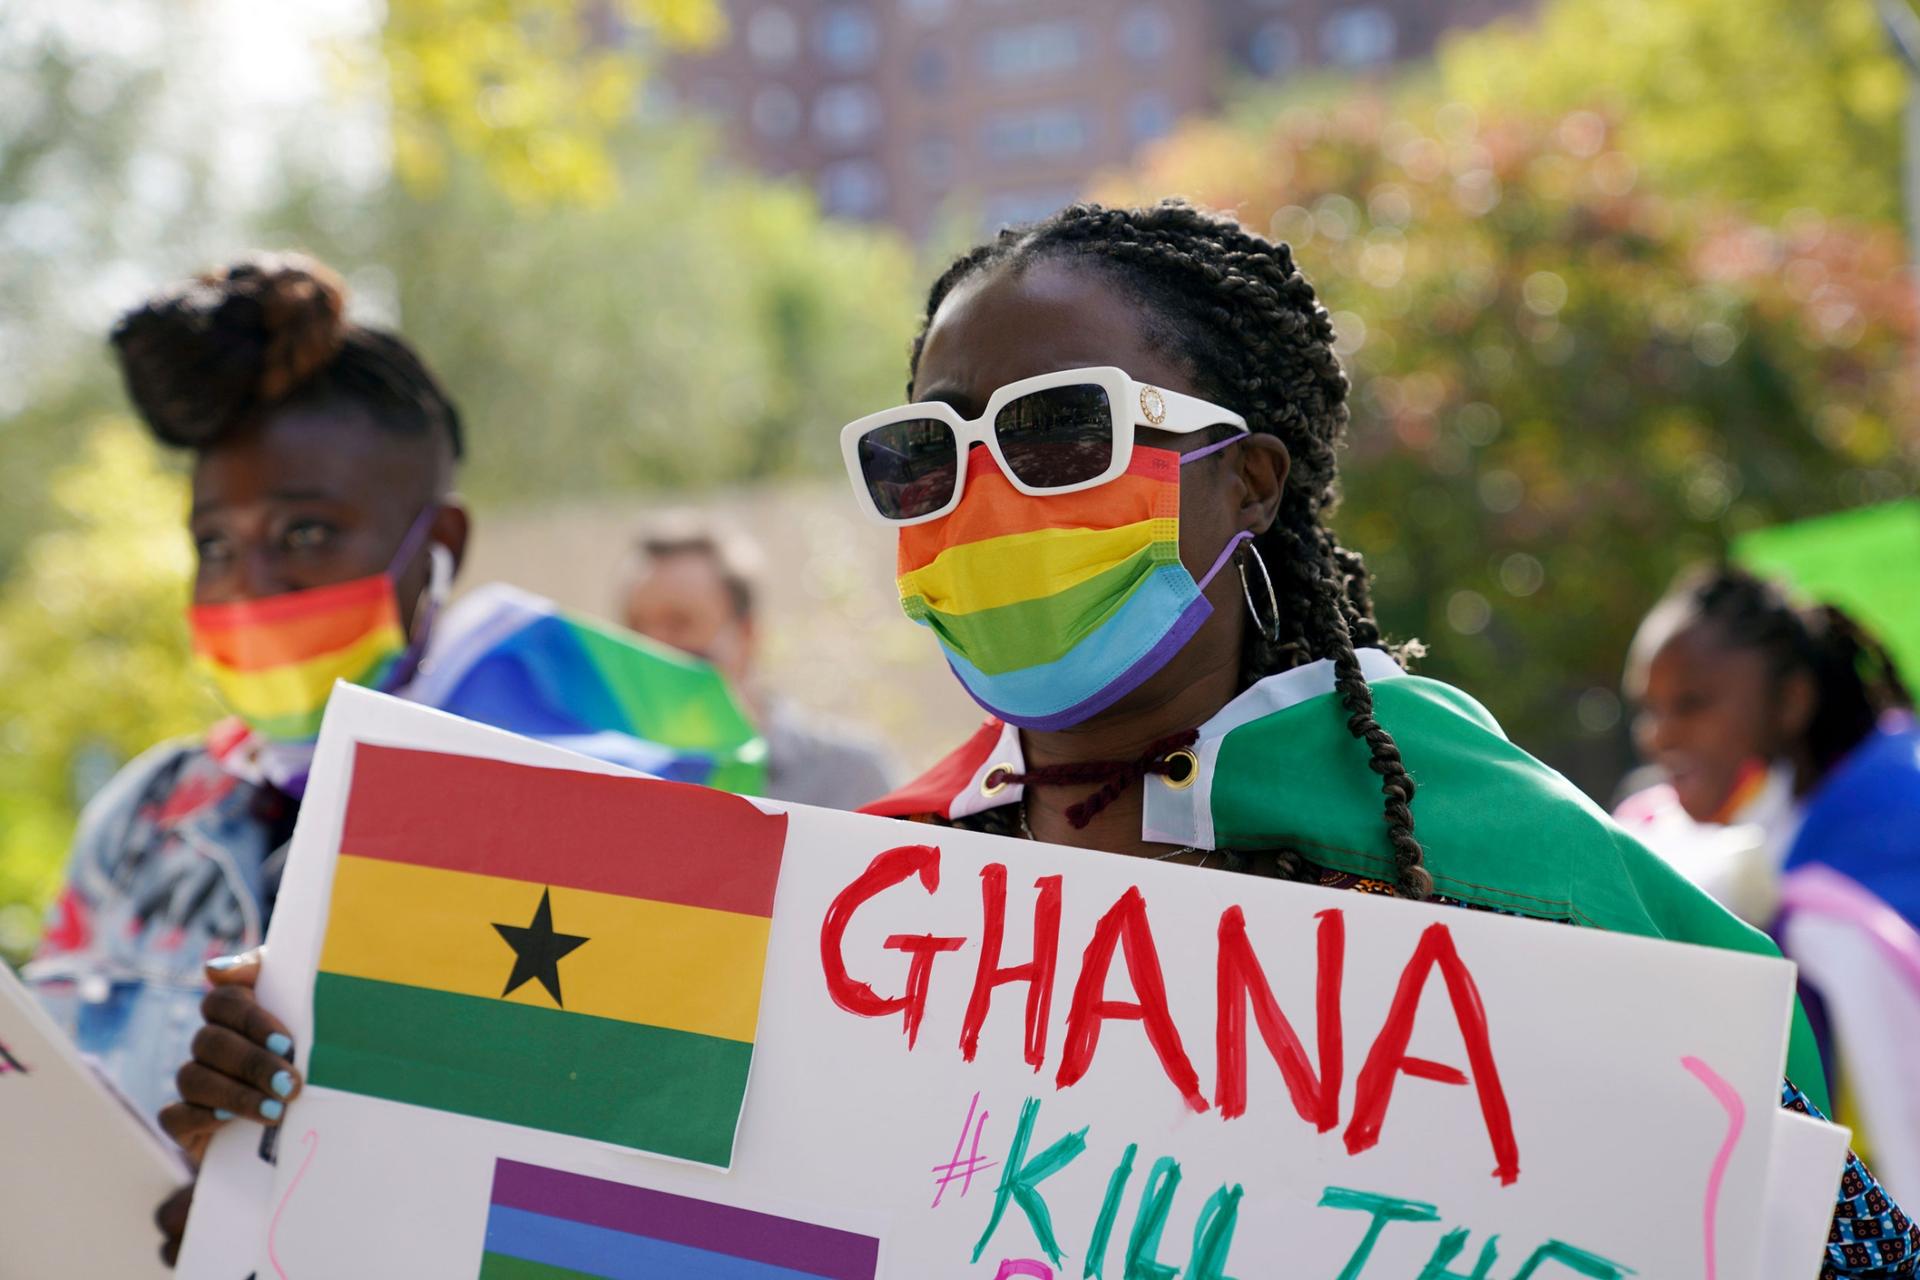 Wilhemina Nyarko attends a rally against a controversial bill being proposed in Ghana's parliament that would make identifying as LGBTQIA or an ally a criminal offense punishable by up to 10 years in prison, in the Harlem neighborhood of New York on Monda